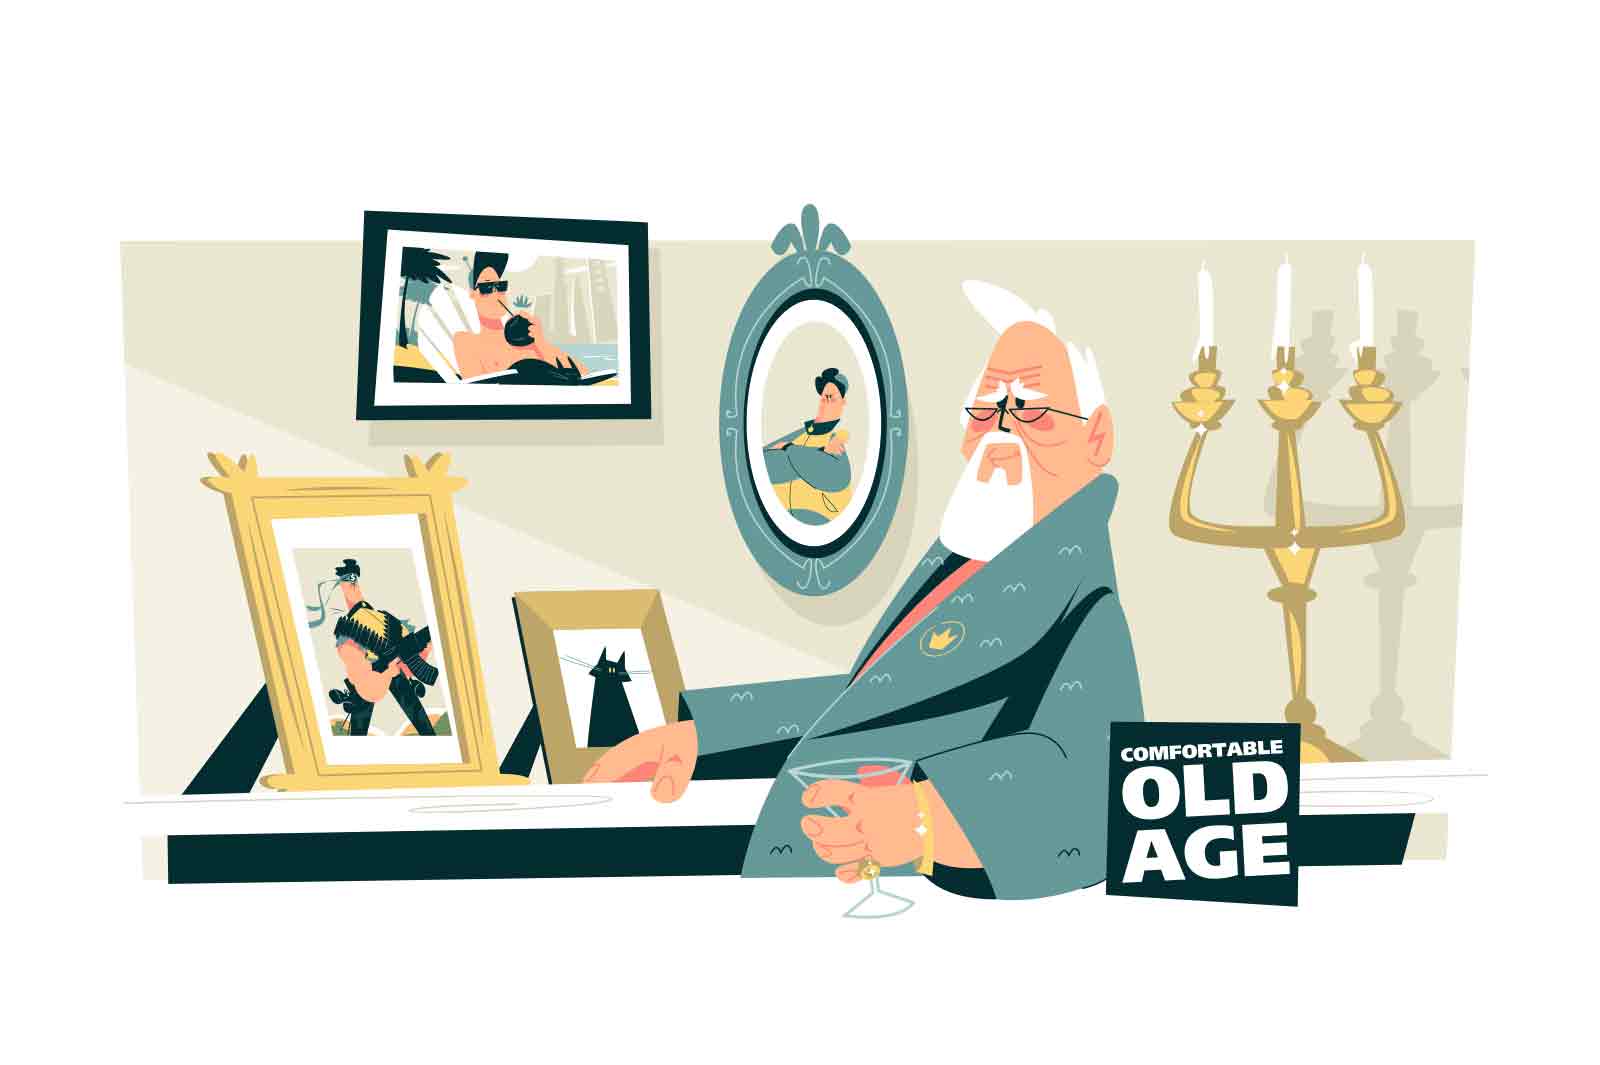 Wealthy elderly man sitting in chair and looking at photos vector illustration. Comfortable old age flat style concept.